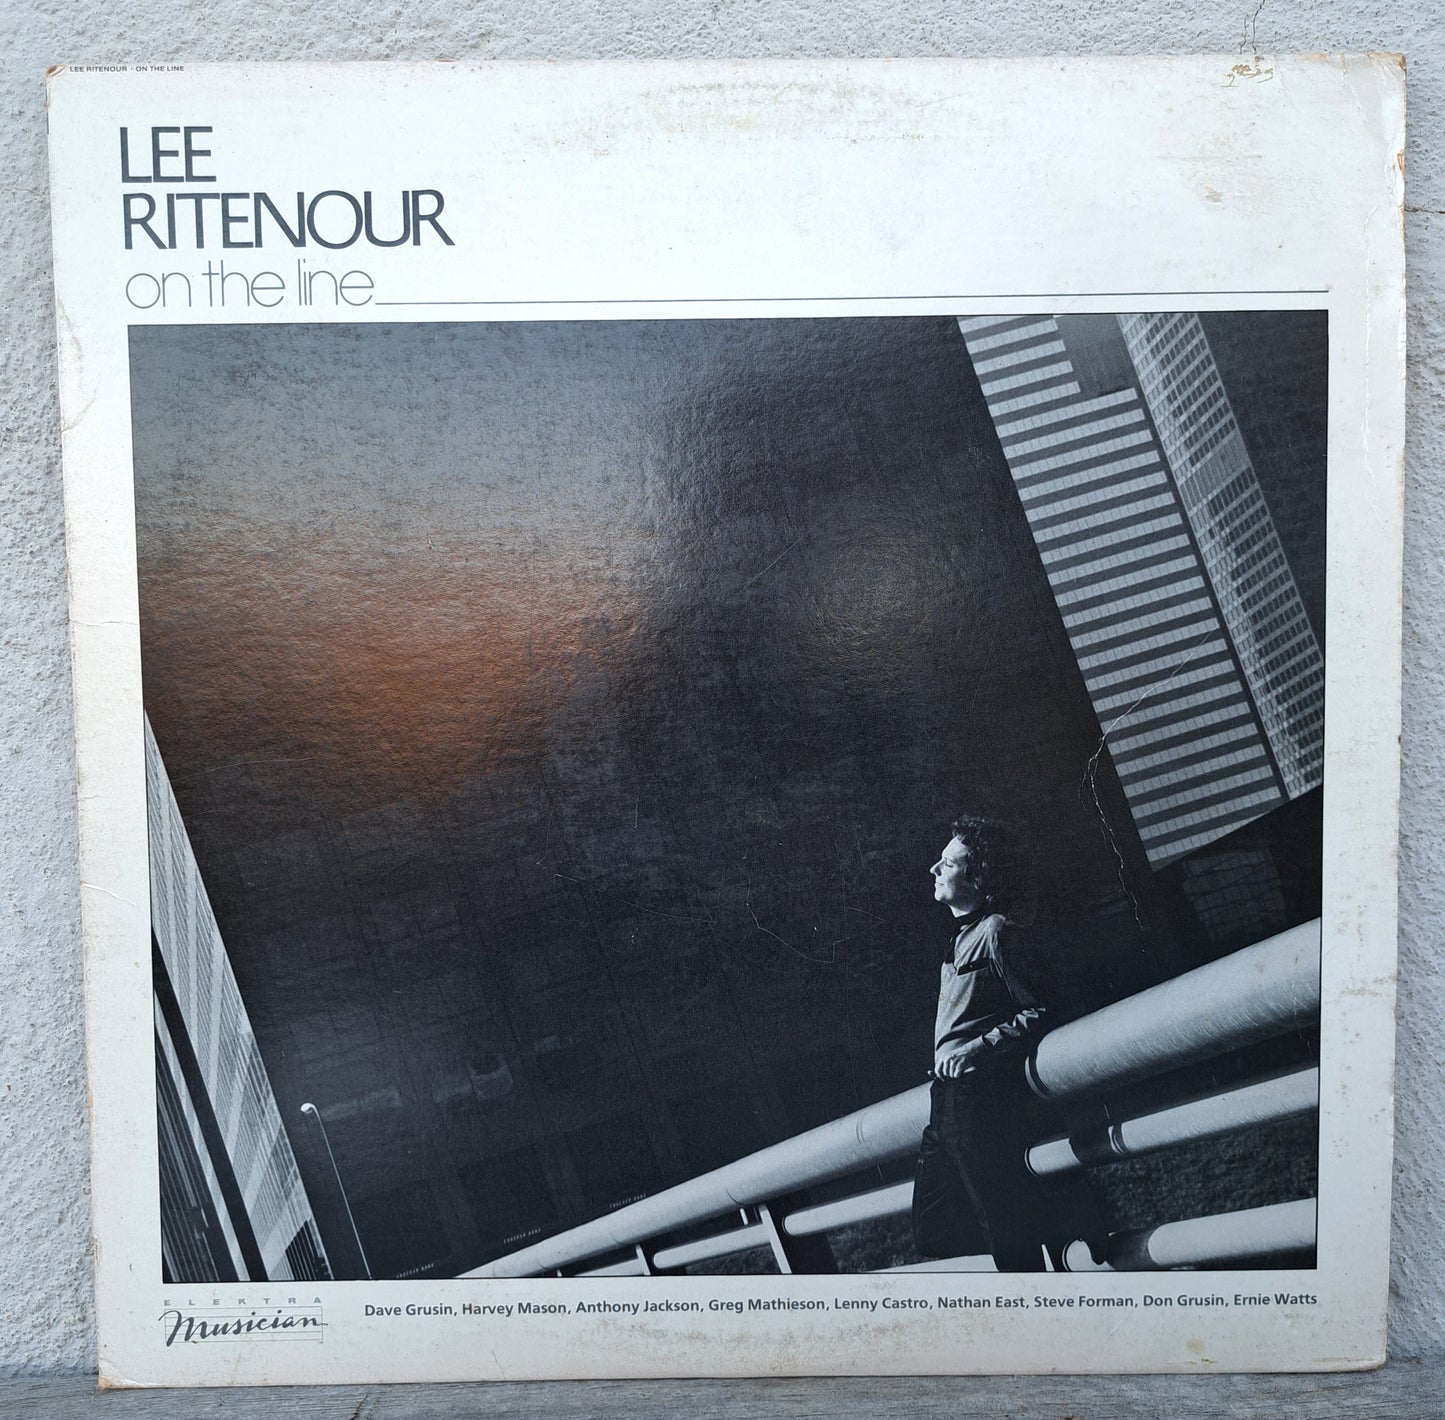 Lee Ritenour - On the line